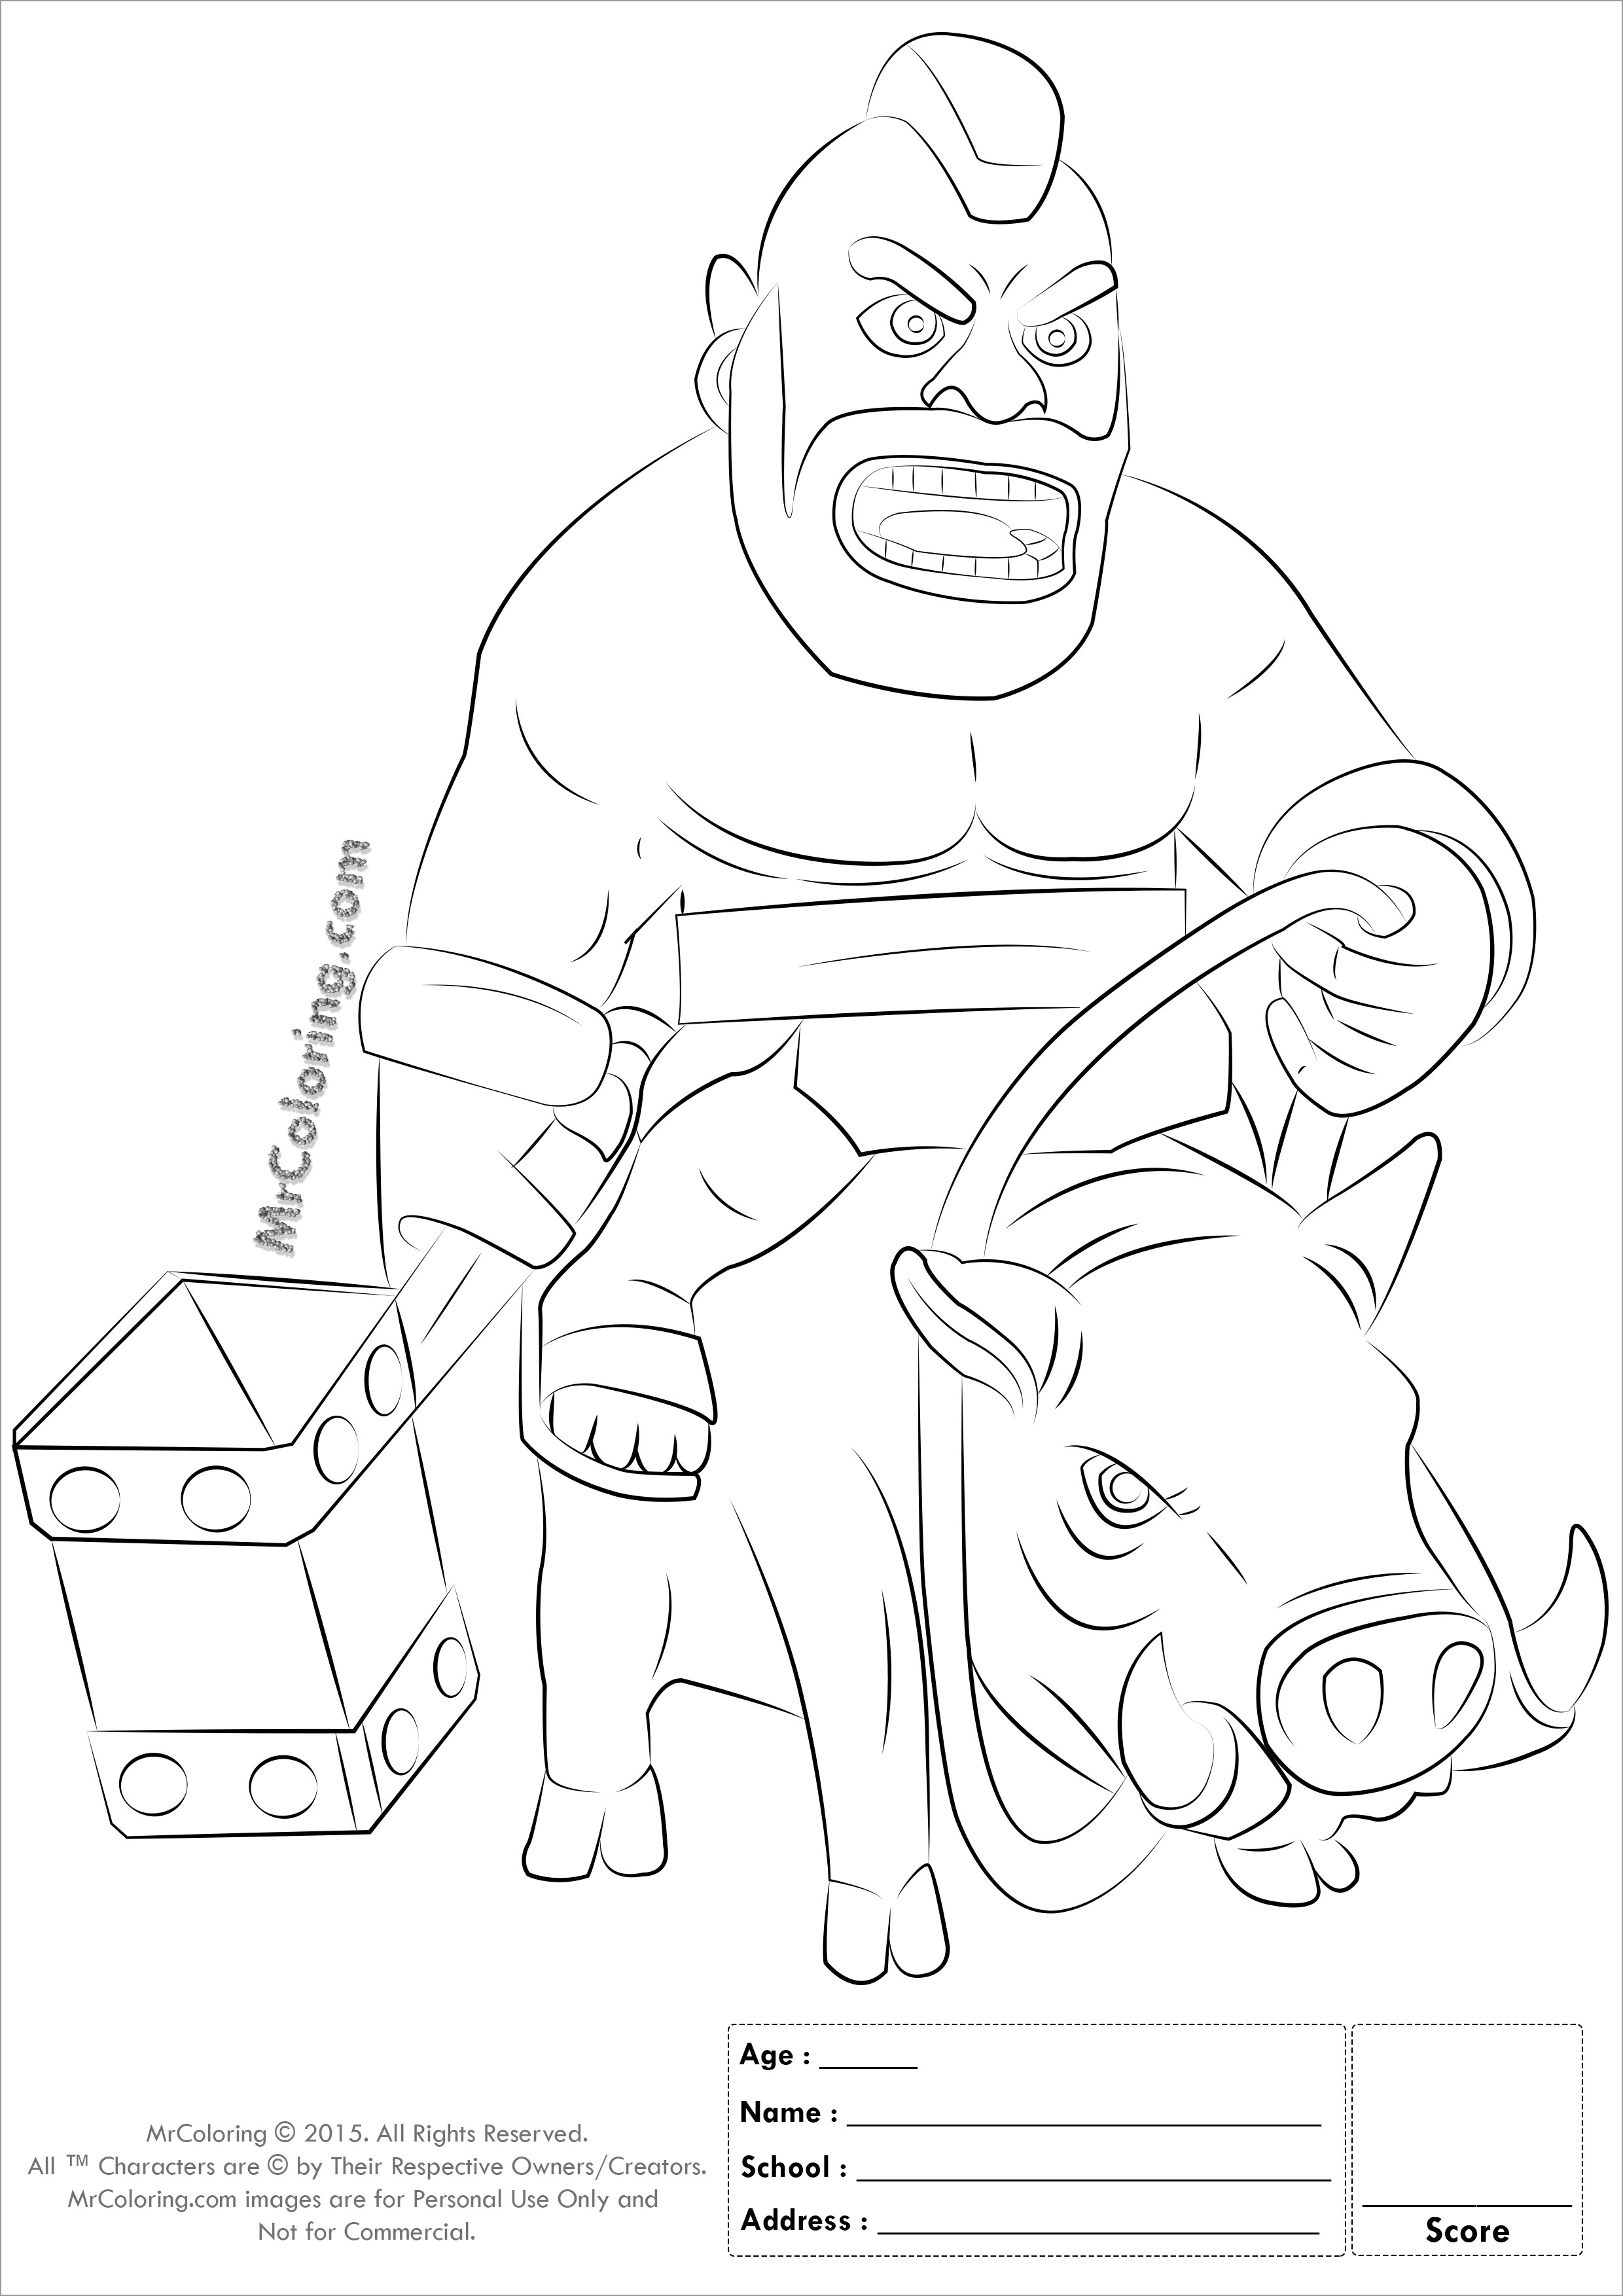 Free Printable Clash Of Clans Hog Rider Coloring Page